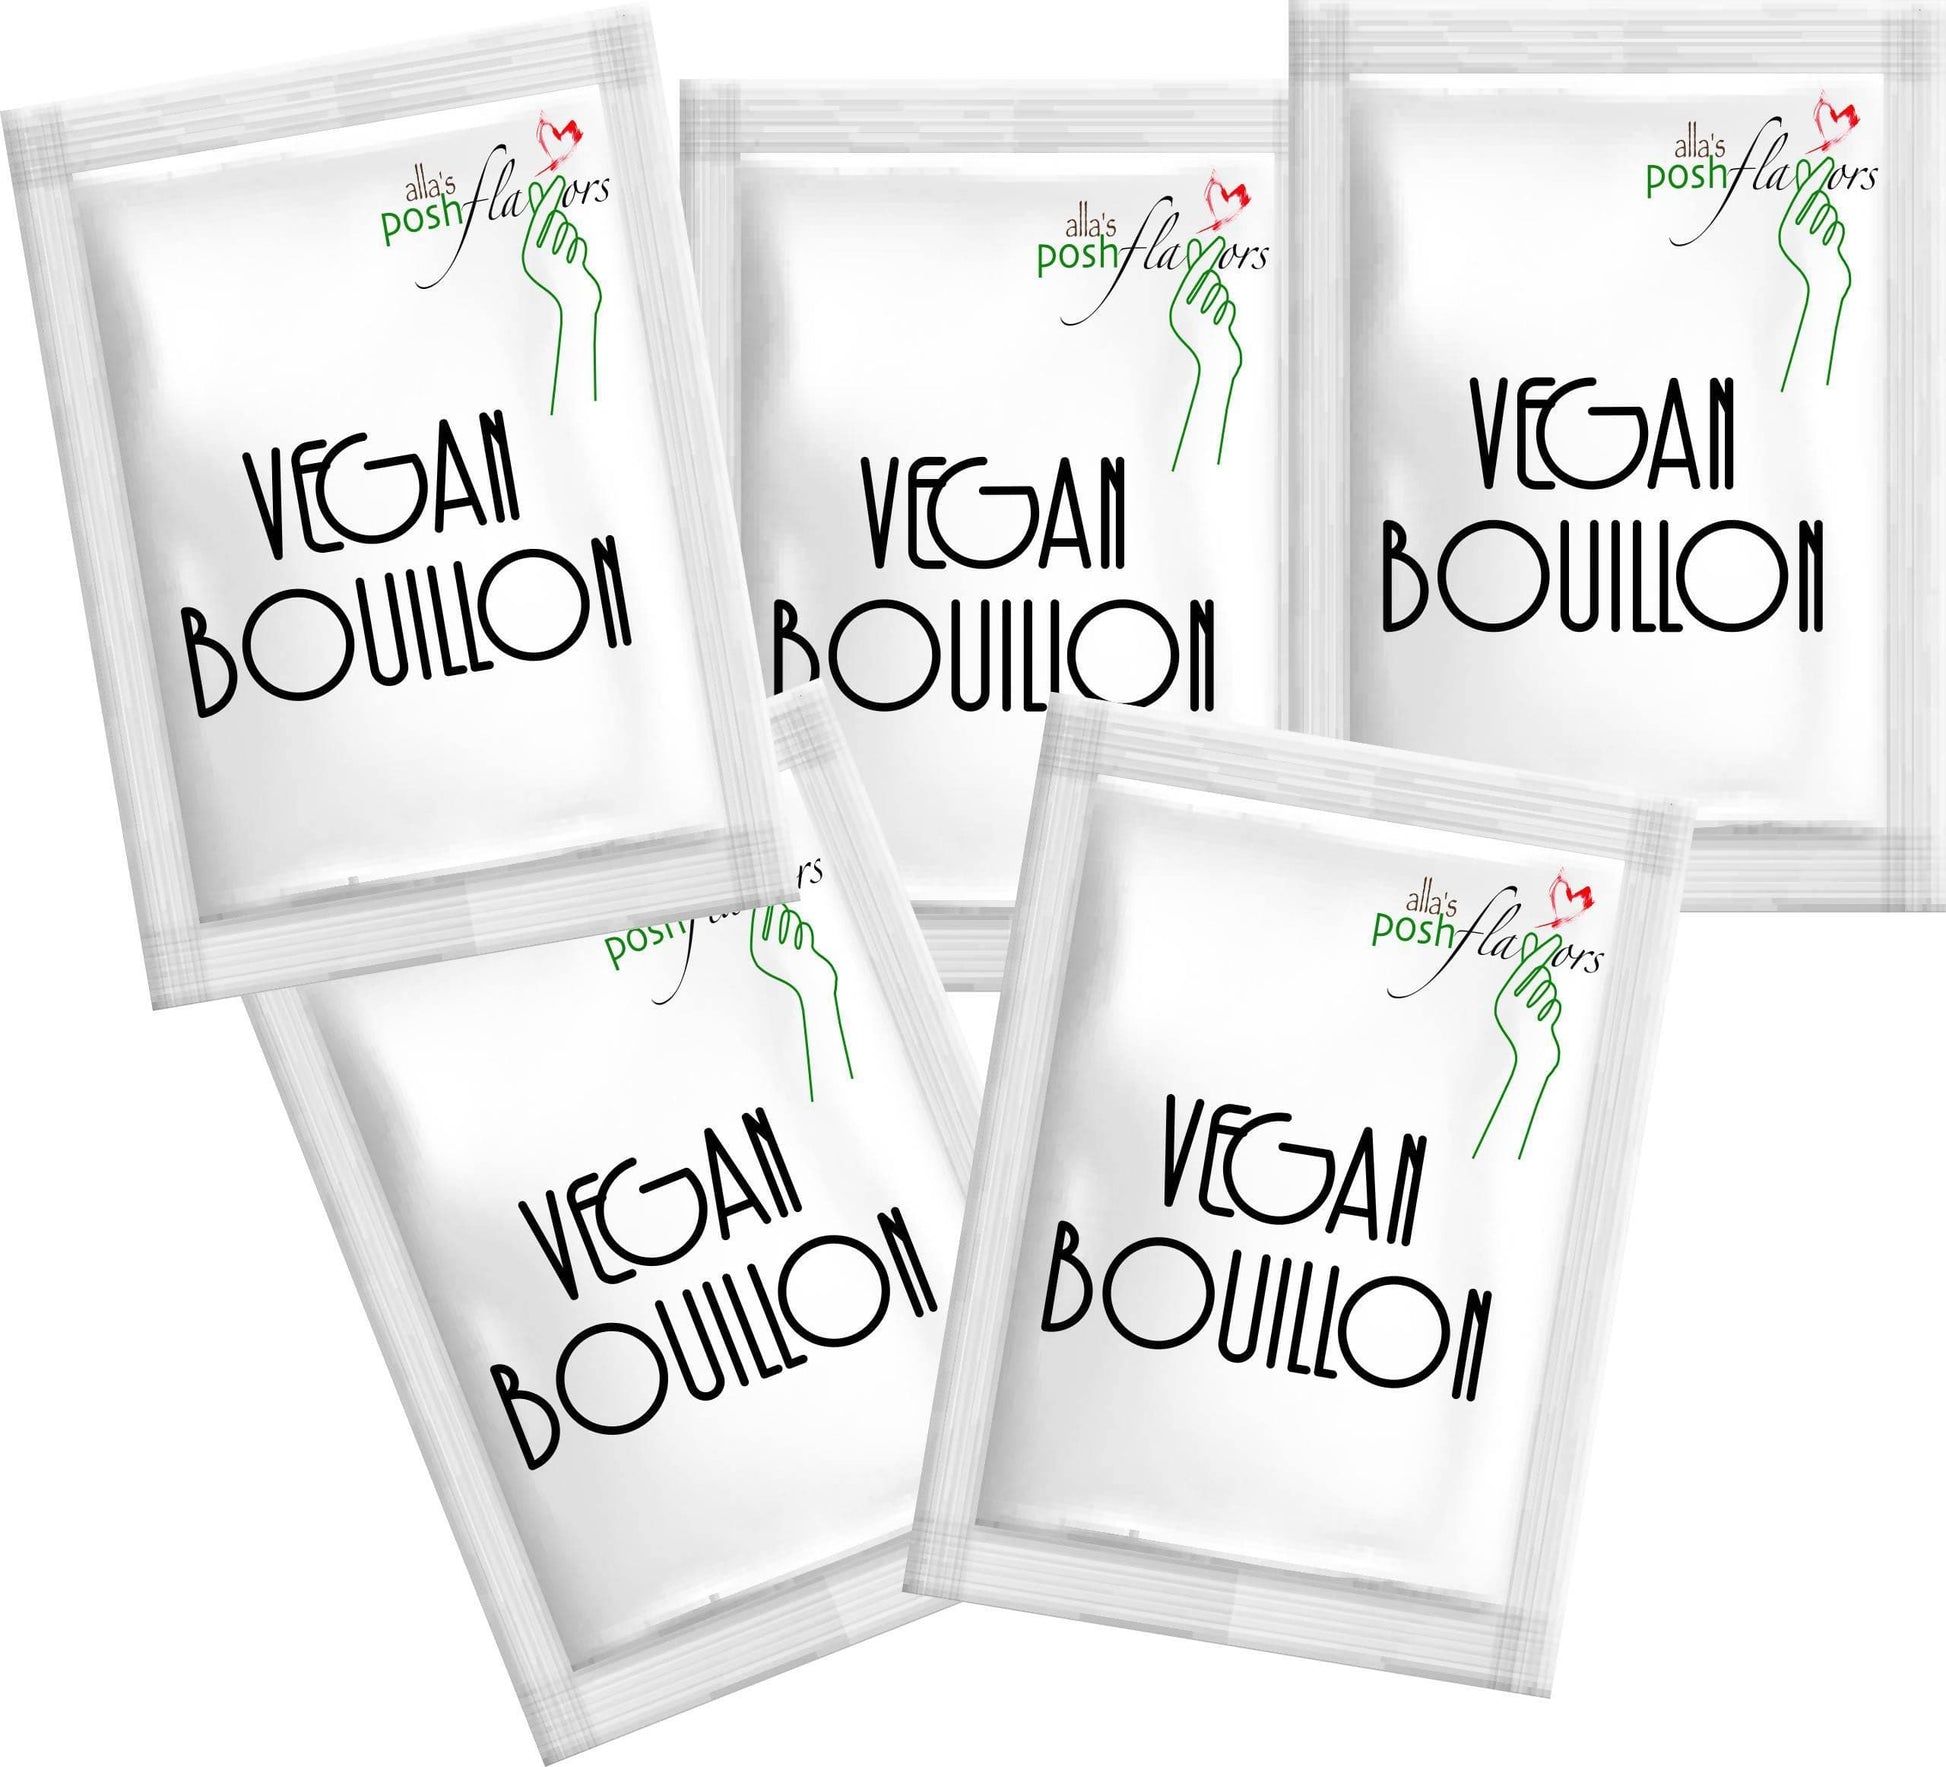 Alla's Posh Flavors Vegan Bouillon & Broth Powder | 5 Individual Sachets | 100grams| 5 litres of Soup Stock | Instant Chicken Style Stock Powder | 100% Vegan | NO MSG | Fortified with Nutritional Yeast Flakes - Vegan Dukan